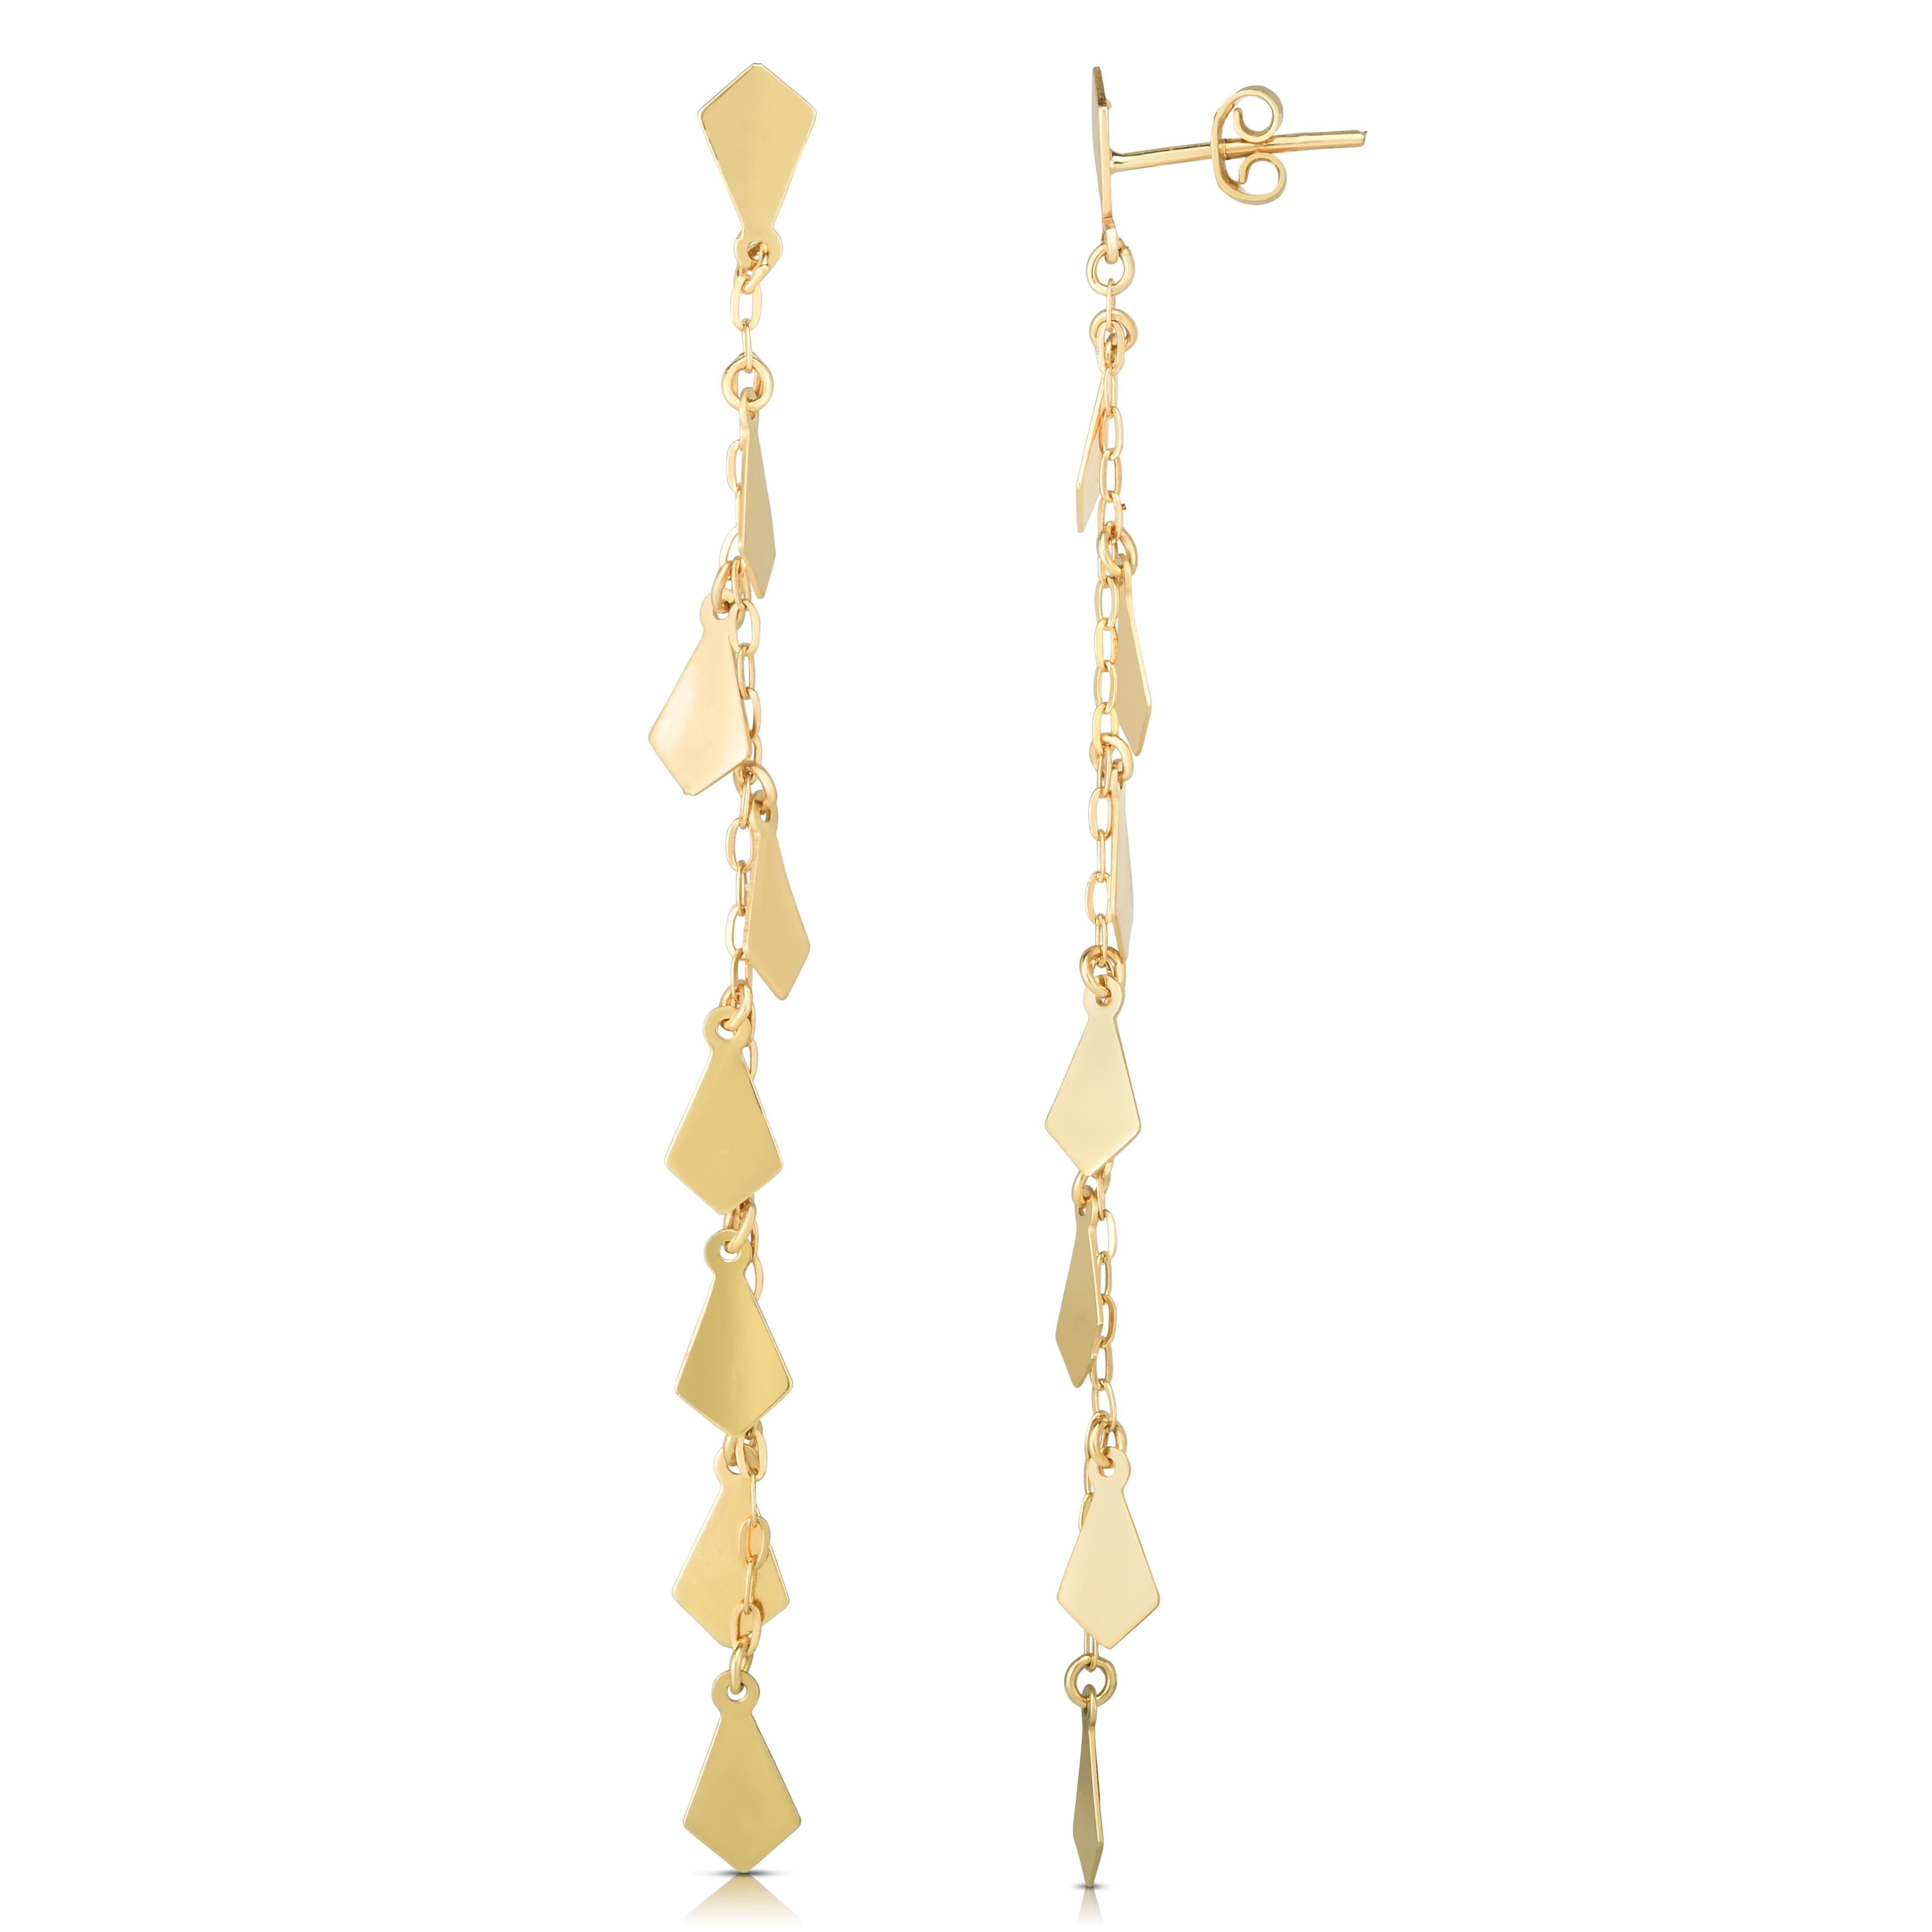 Polished Tear Drop Drop Earring with Push Back Clasp